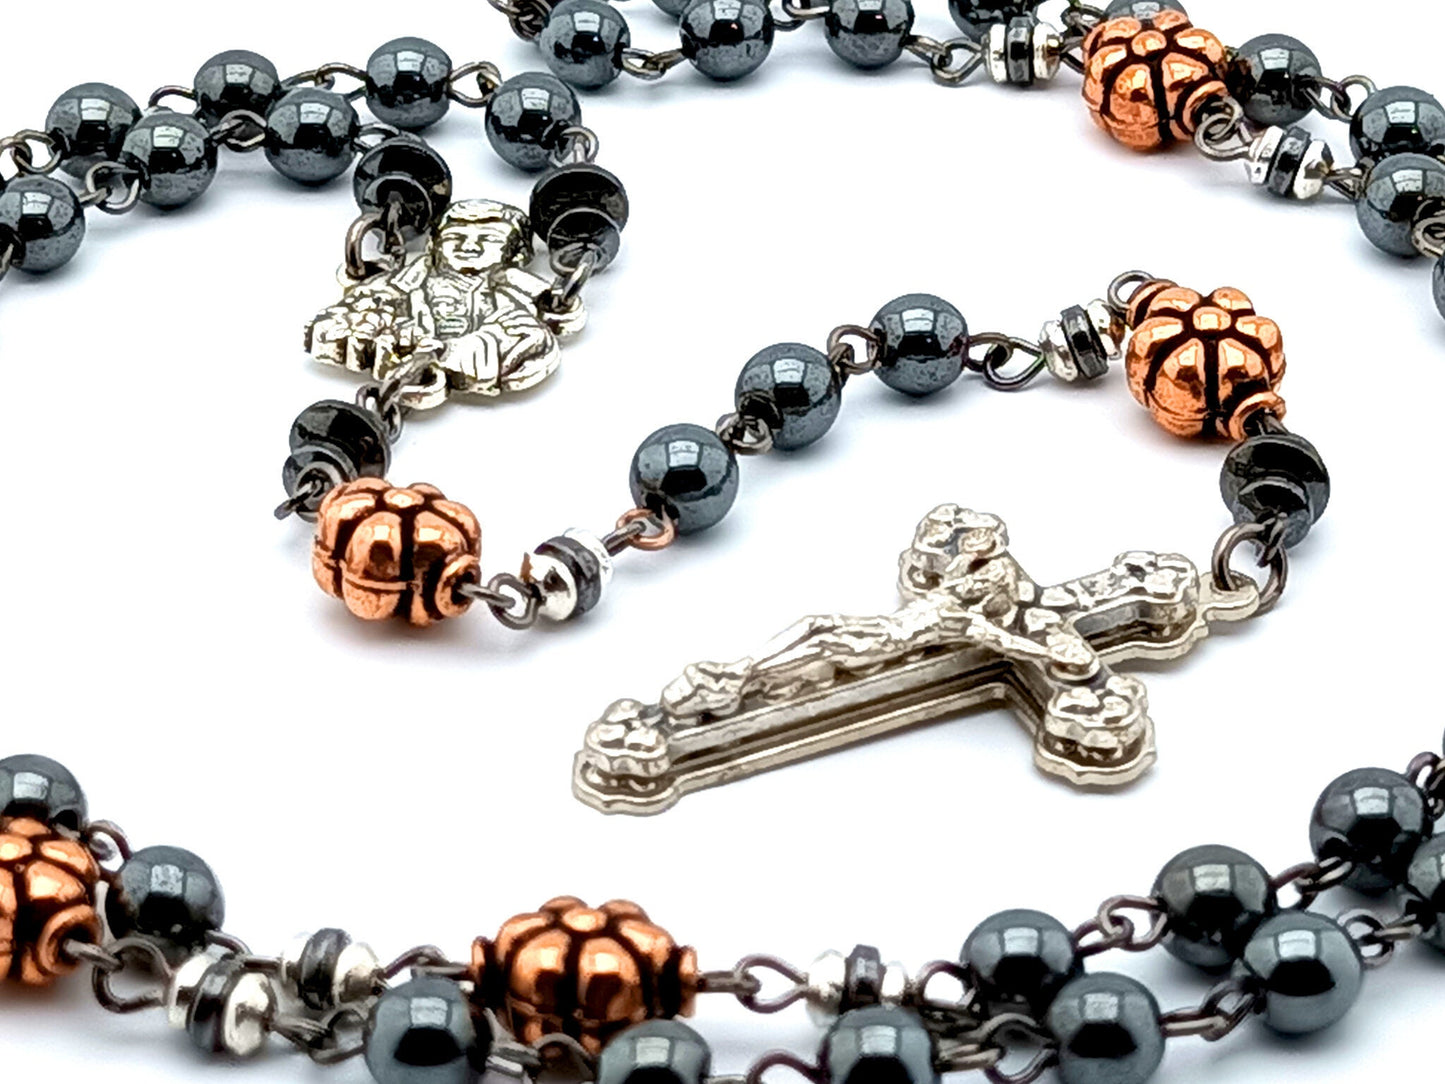 Saint Gabriel Possenti unique rosary beads with hemitite and copper beads, silver hearts crucifix and centre medal.